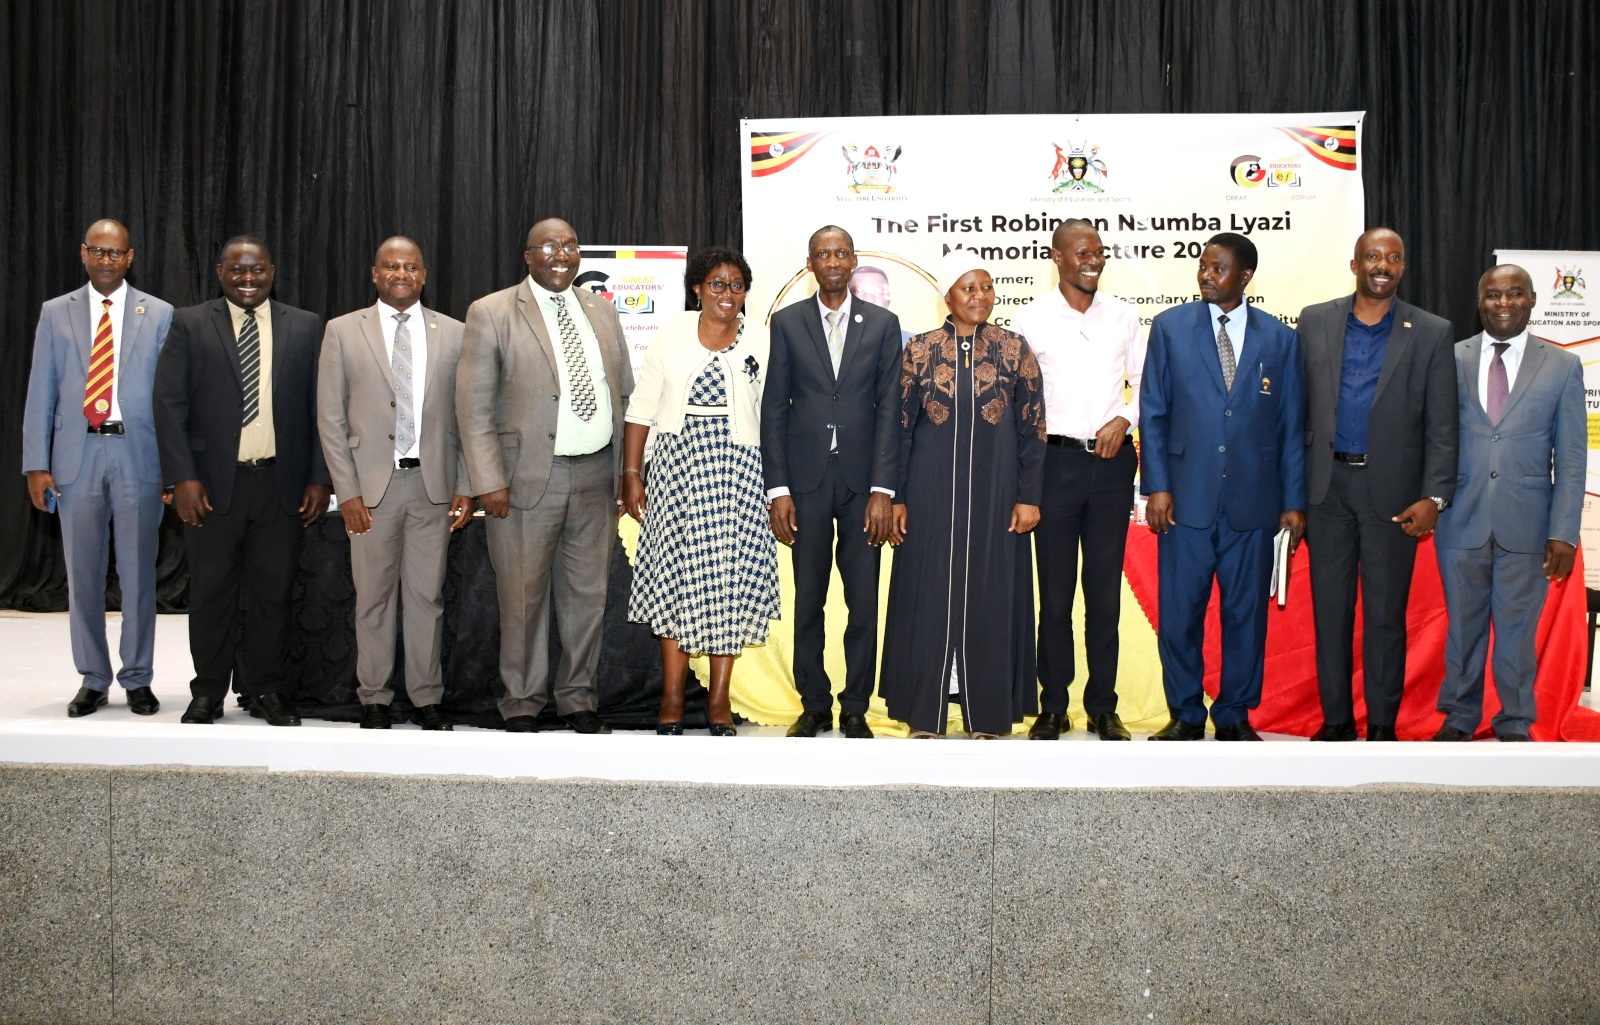 Mr. George Mutekanga (4th L) is joined by the Principal CAES-Prof. Anthony Muwagga Mugagga (C), Hajjat Zaujja Ndifuna (5th R) and other officials for a group photo at the First Robinson Nsumba-Lyazi Memorial Lecture on 25th January 2023, Yusuf Lule Central Teaching Facility Auditorium, Makerere Univeristy.